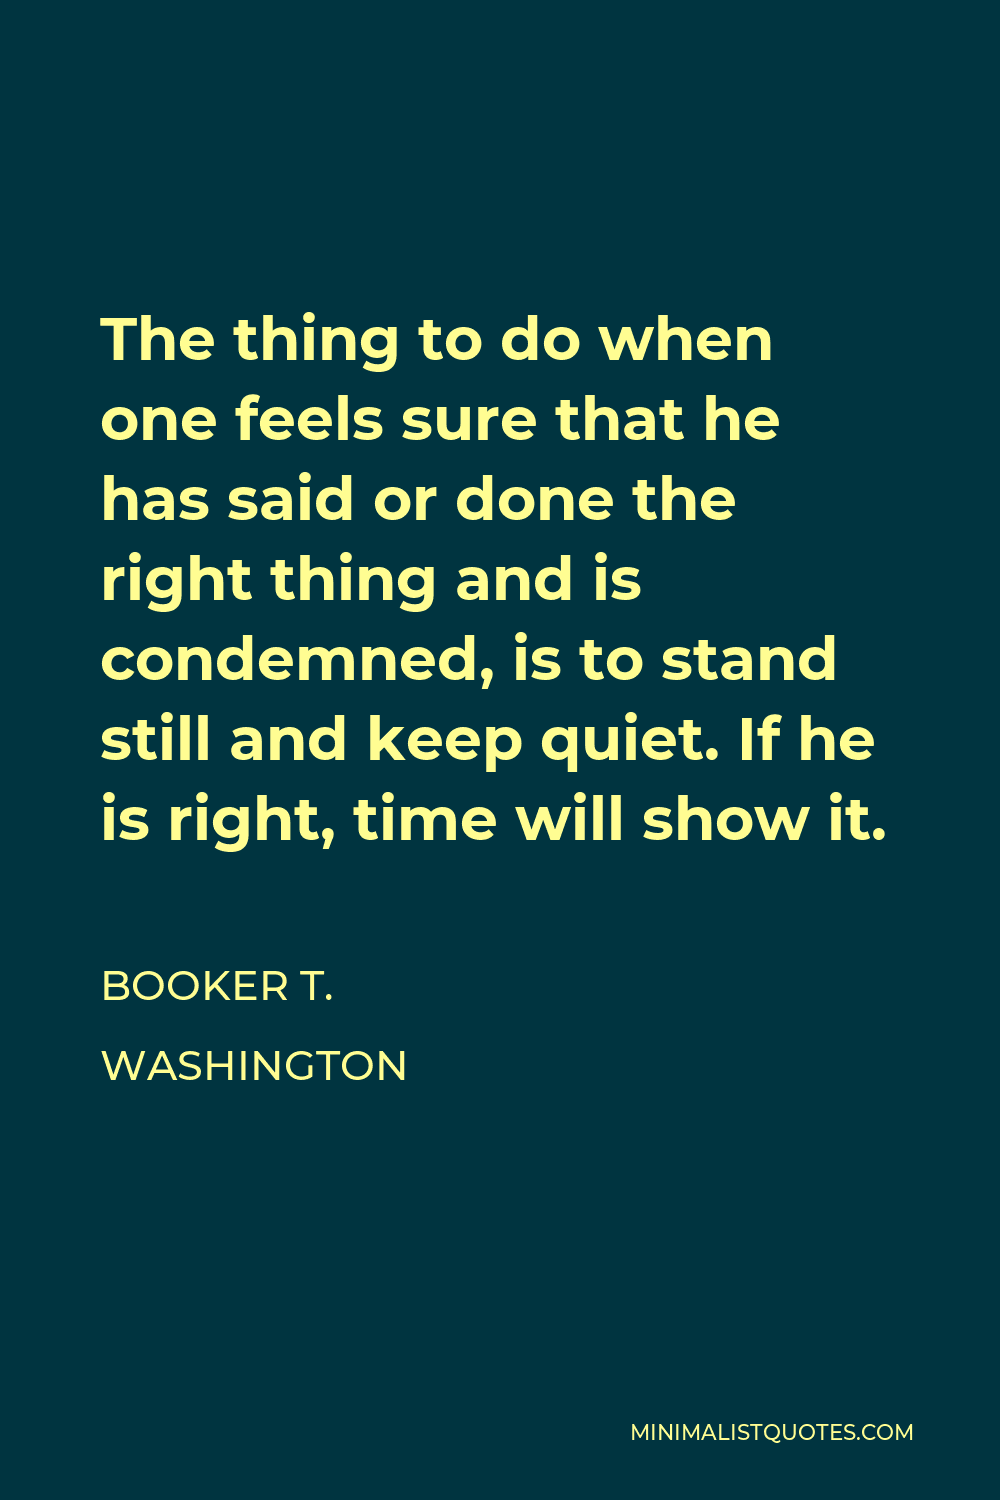 Booker T. Washington Quote - The thing to do when one feels sure that he has said or done the right thing and is condemned, is to stand still and keep quiet. If he is right, time will show it.